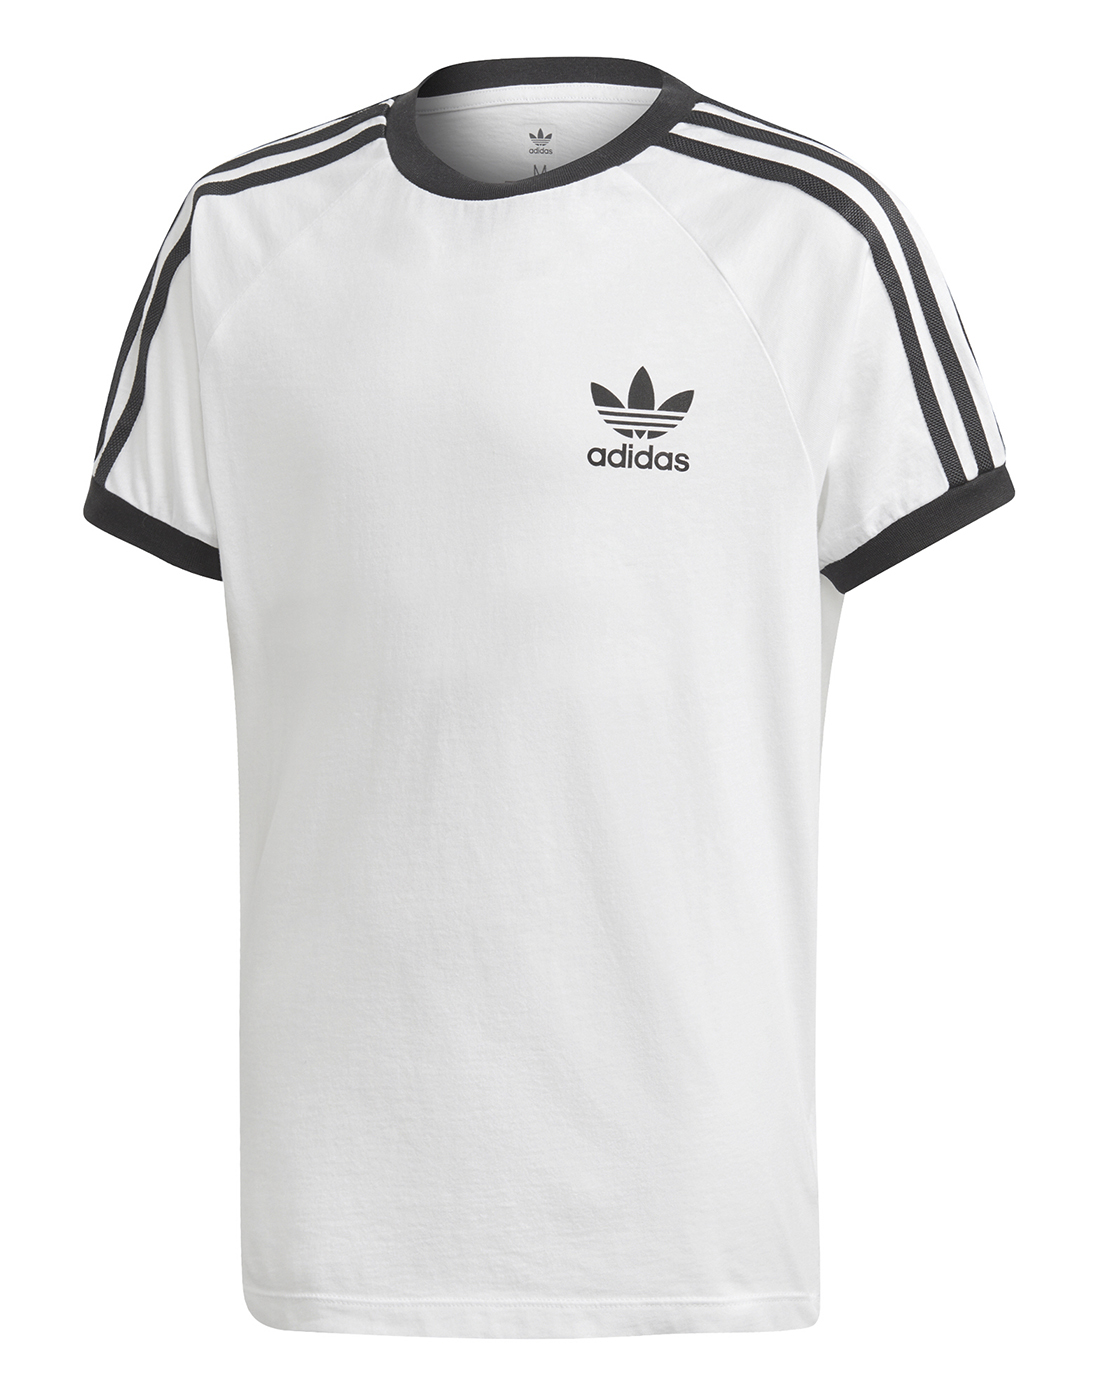 adidas Older California T-Shirt White | Life Style Sports IE